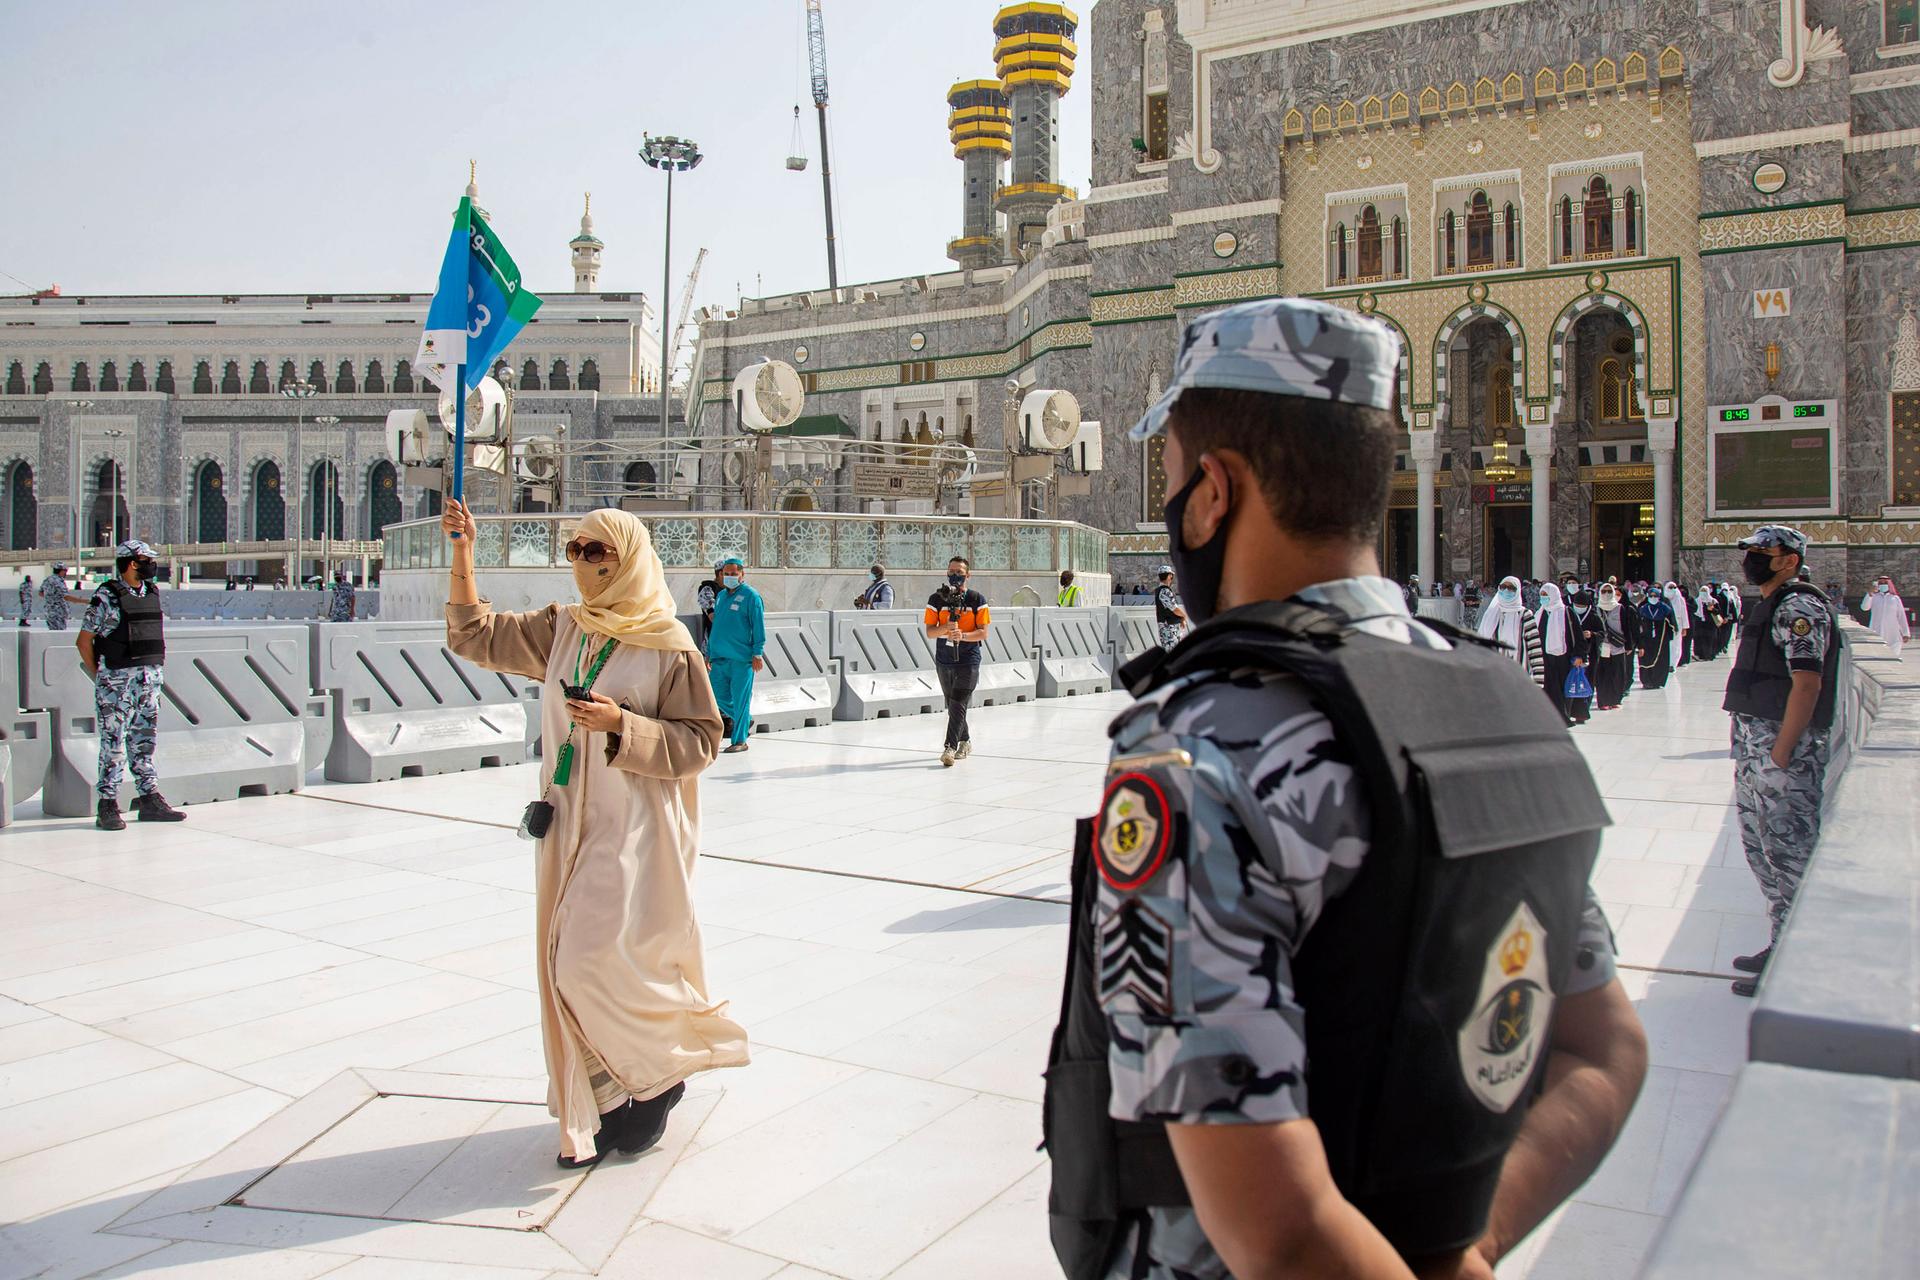 A security official is shown in the near ground with a woman in the distance walking and holding up a guide flag.